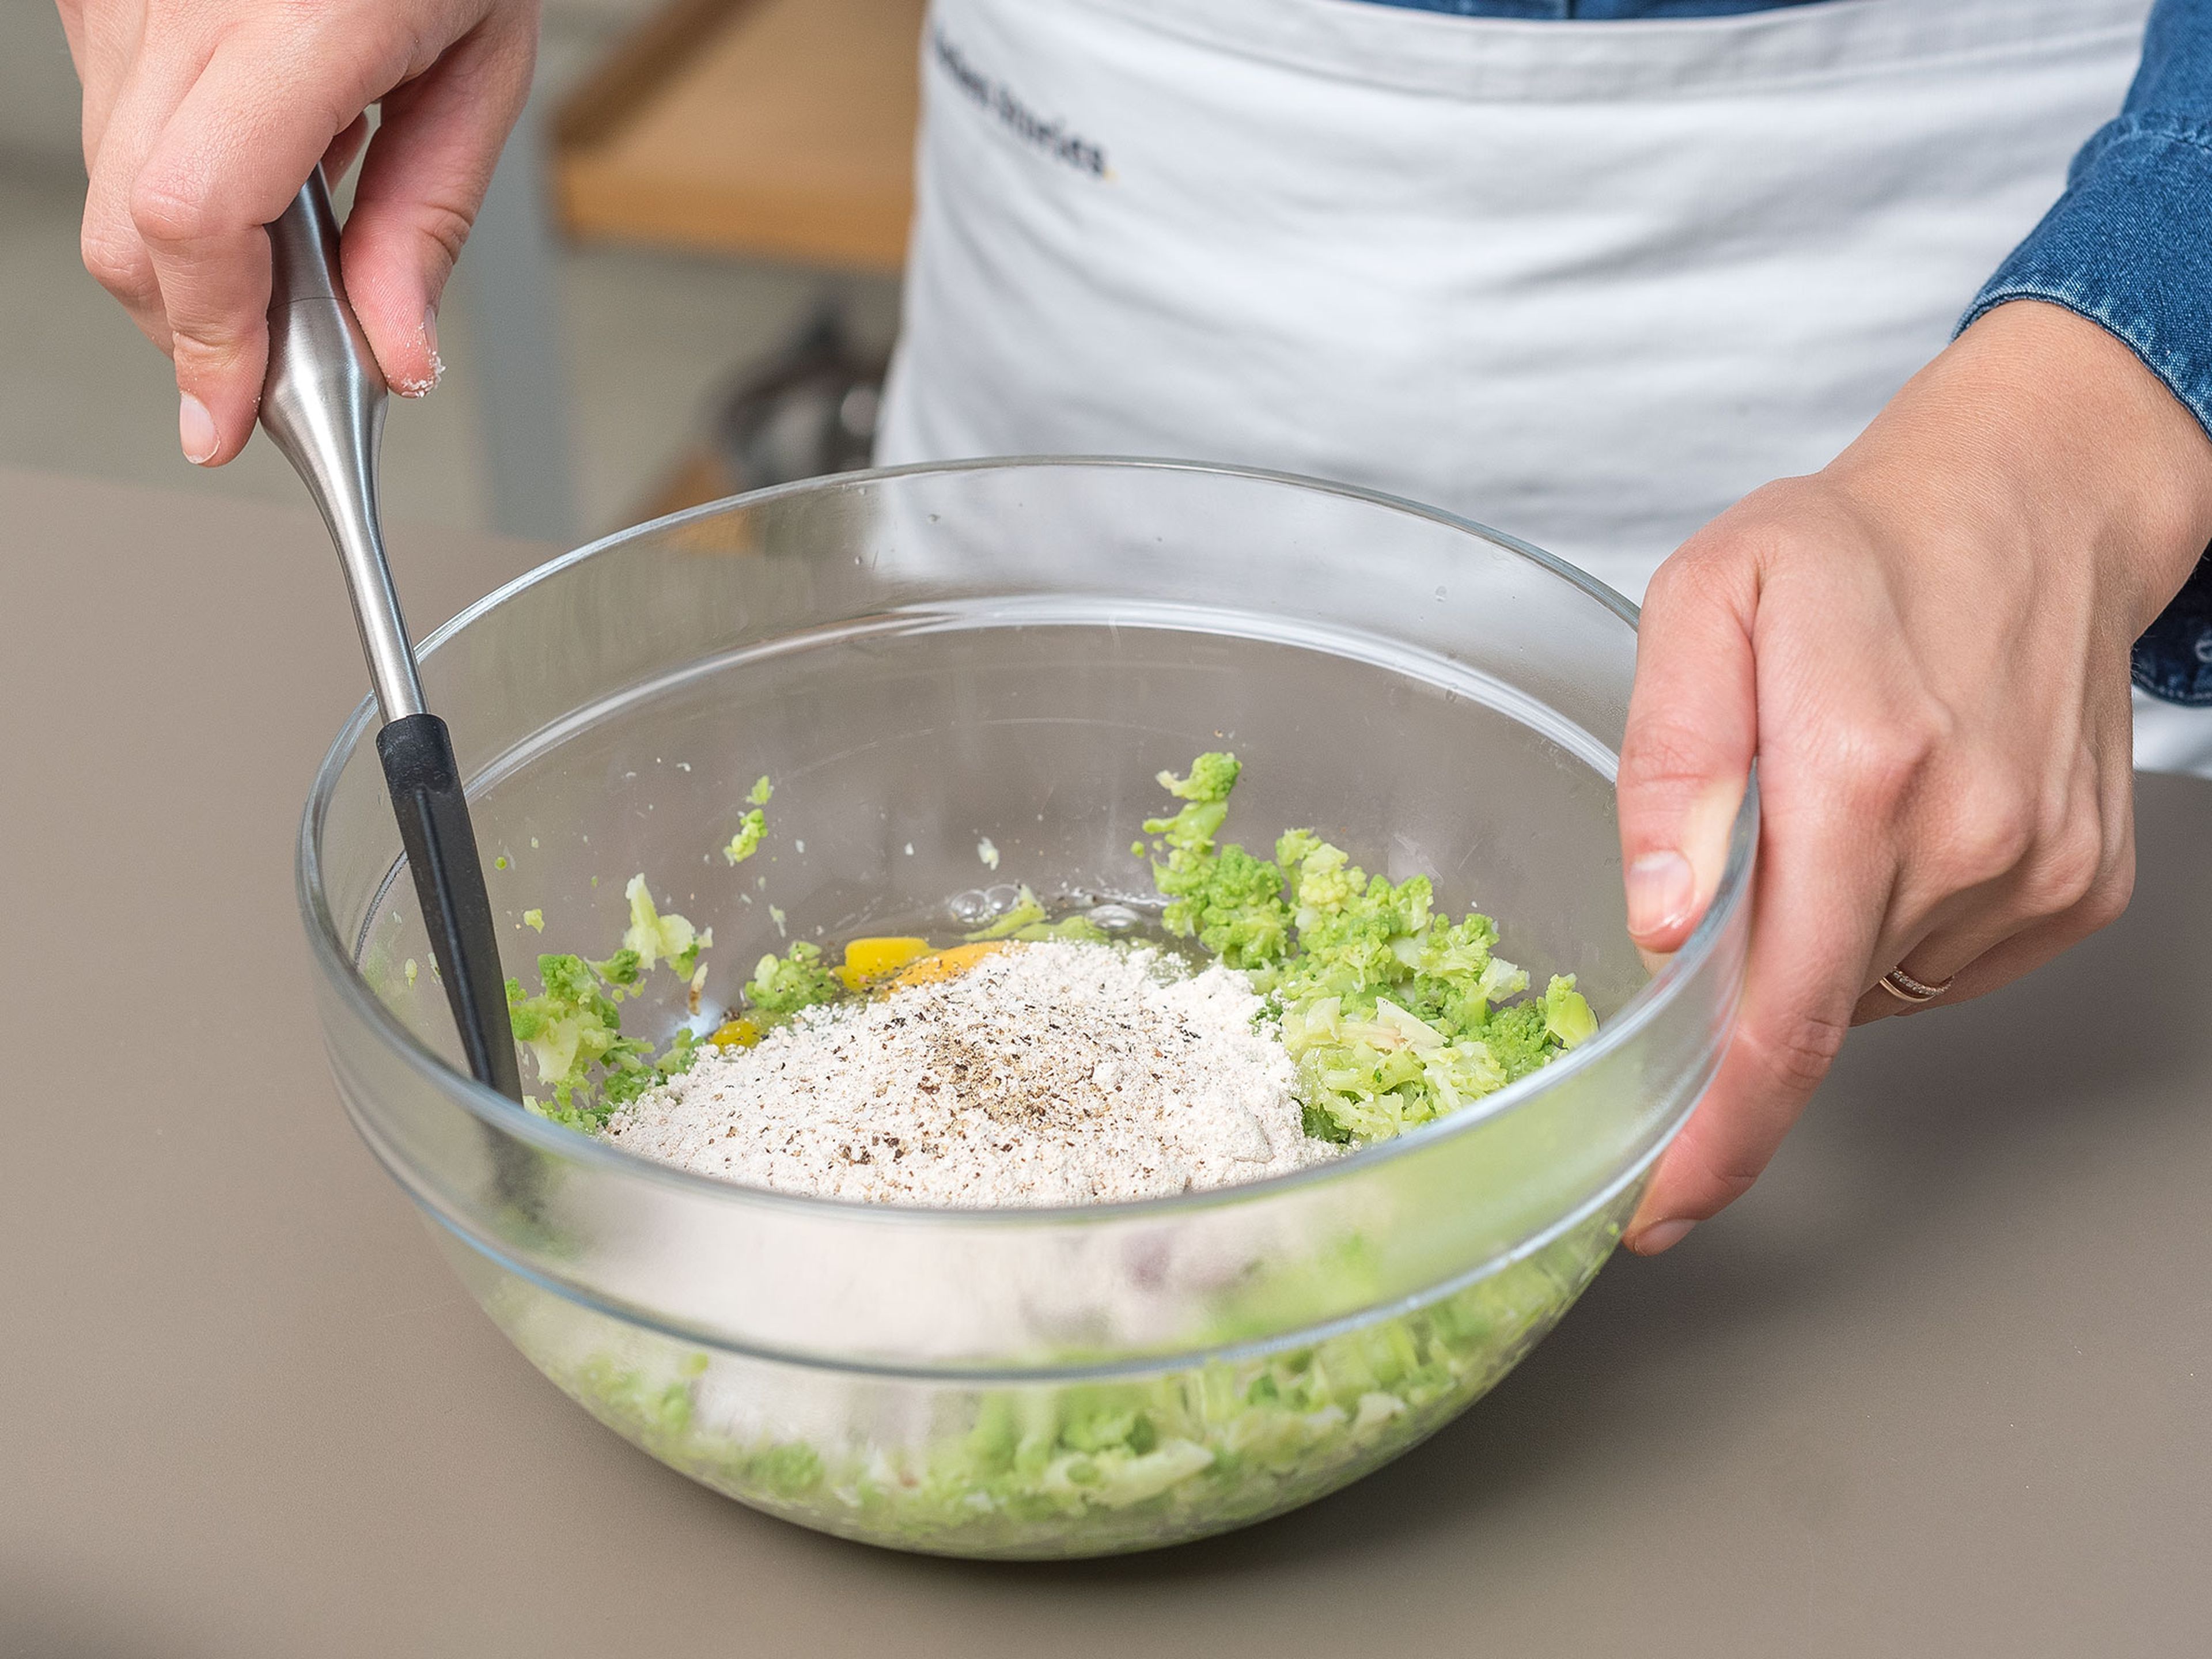 Finely chop scallions. Mash Romanesco in a bowl. Add eggs, chopped scallions, whole wheat flour, salt, and pepper, and mix until a sticky batter forms.